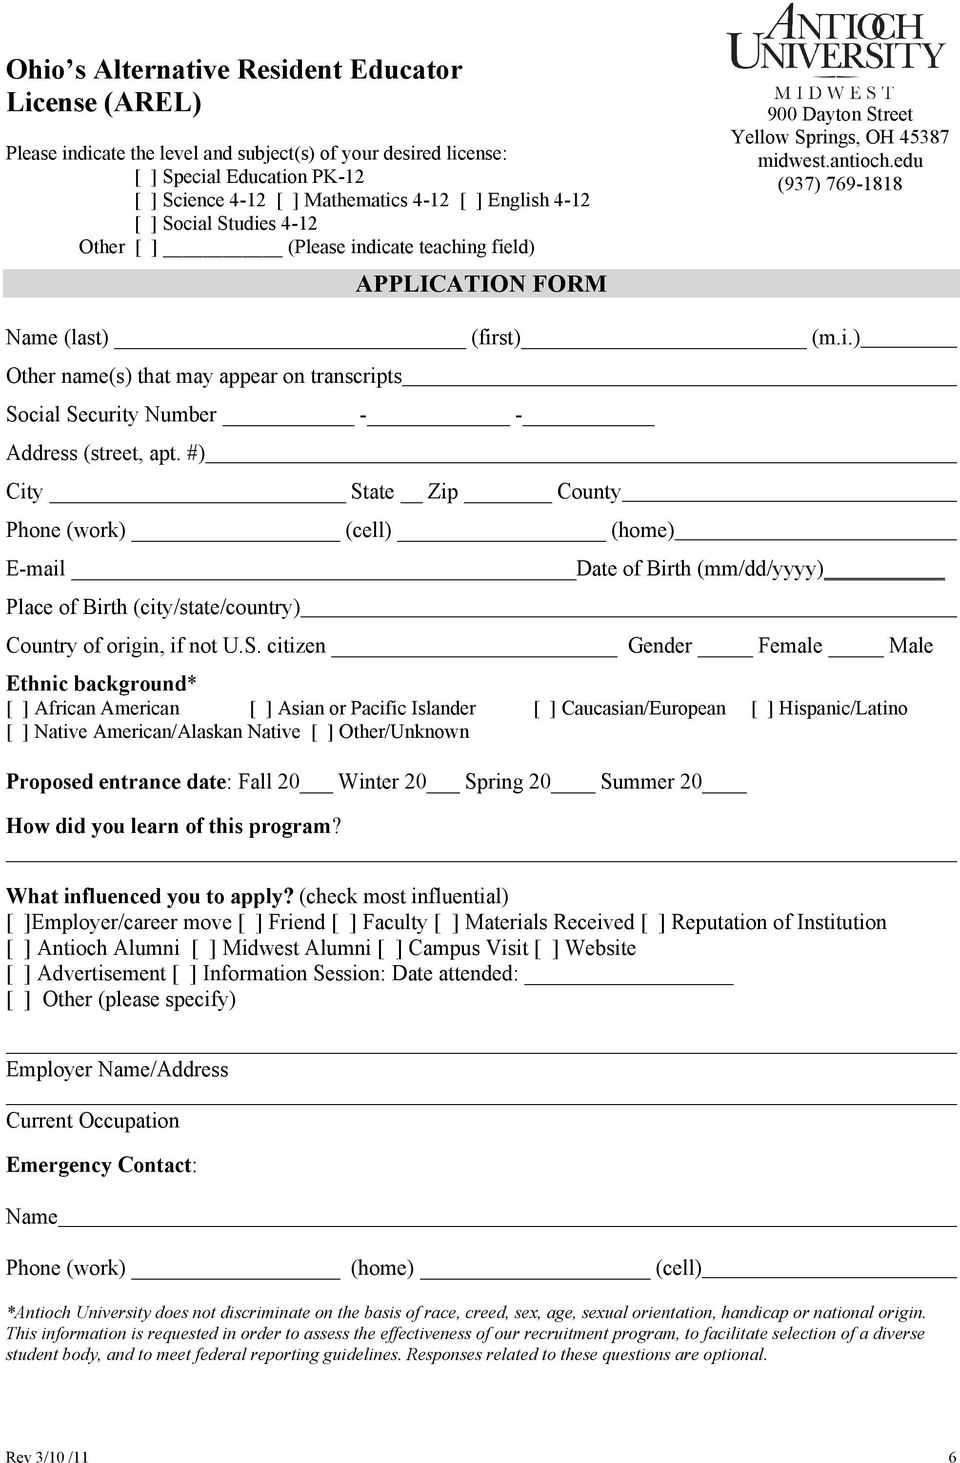 edu (937) 769-1818 APPLICATION FORM ICATION FORM Name (last) (first) (m.i.) Other name(s) that may appear on transcripts Social Security Number - - Address (street, apt.